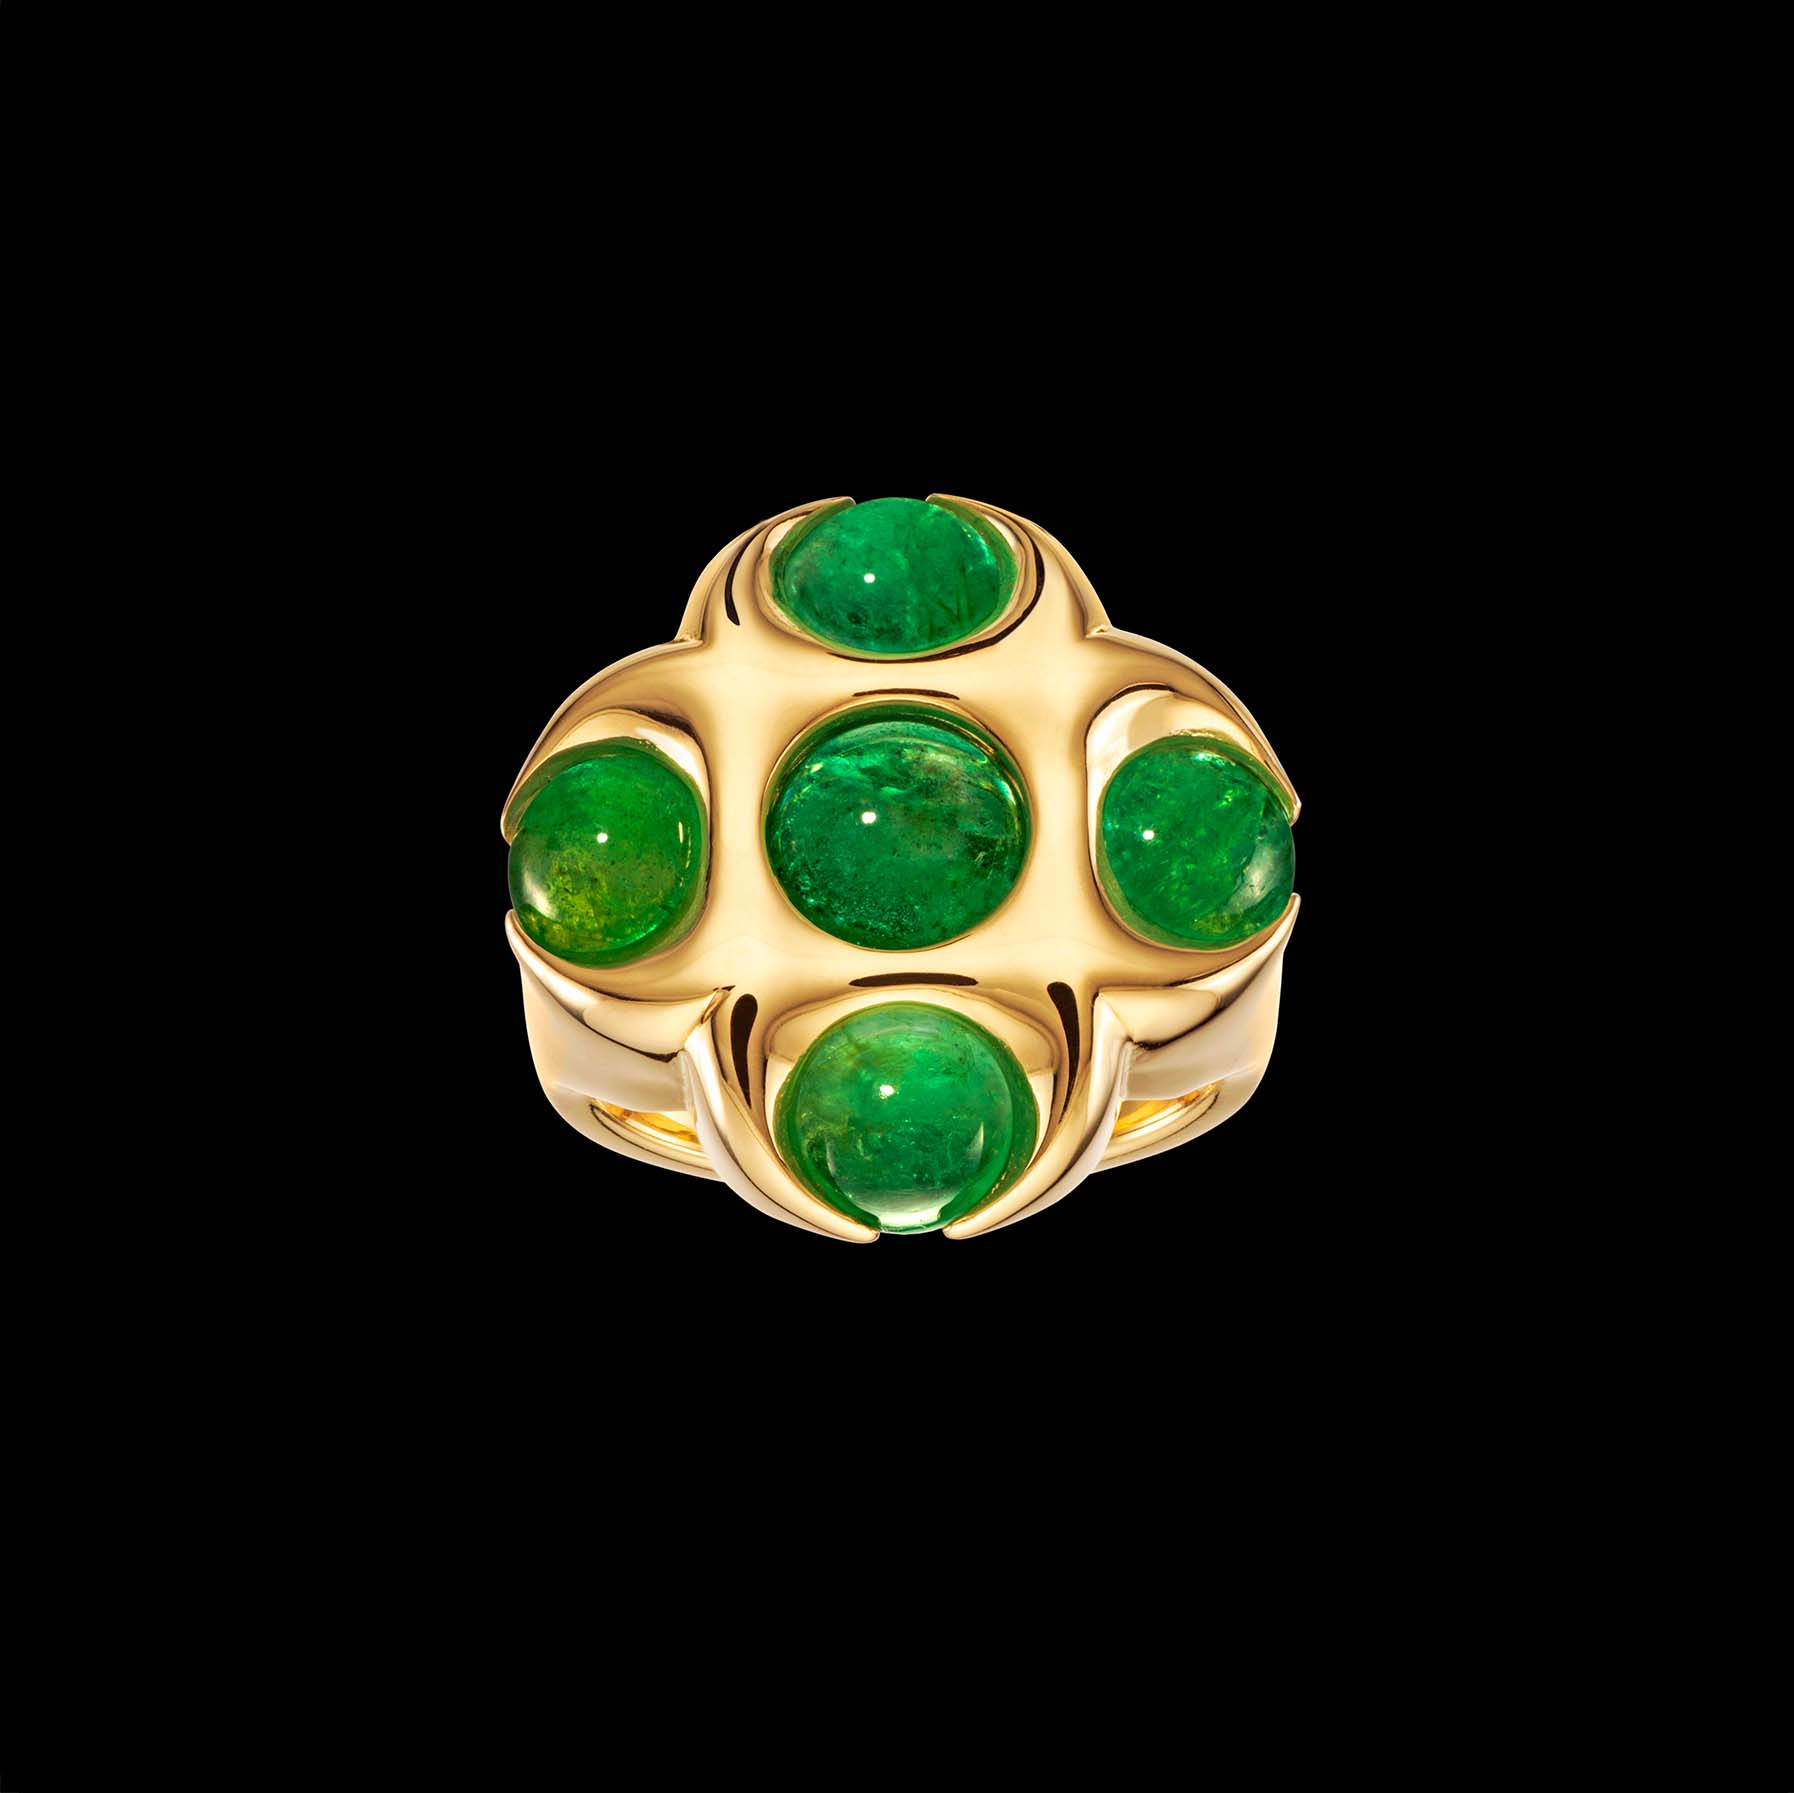 Emerald horns ring by designer Solange Azagury-Partridge, 18k Yellow Gold and Emerald - Front view